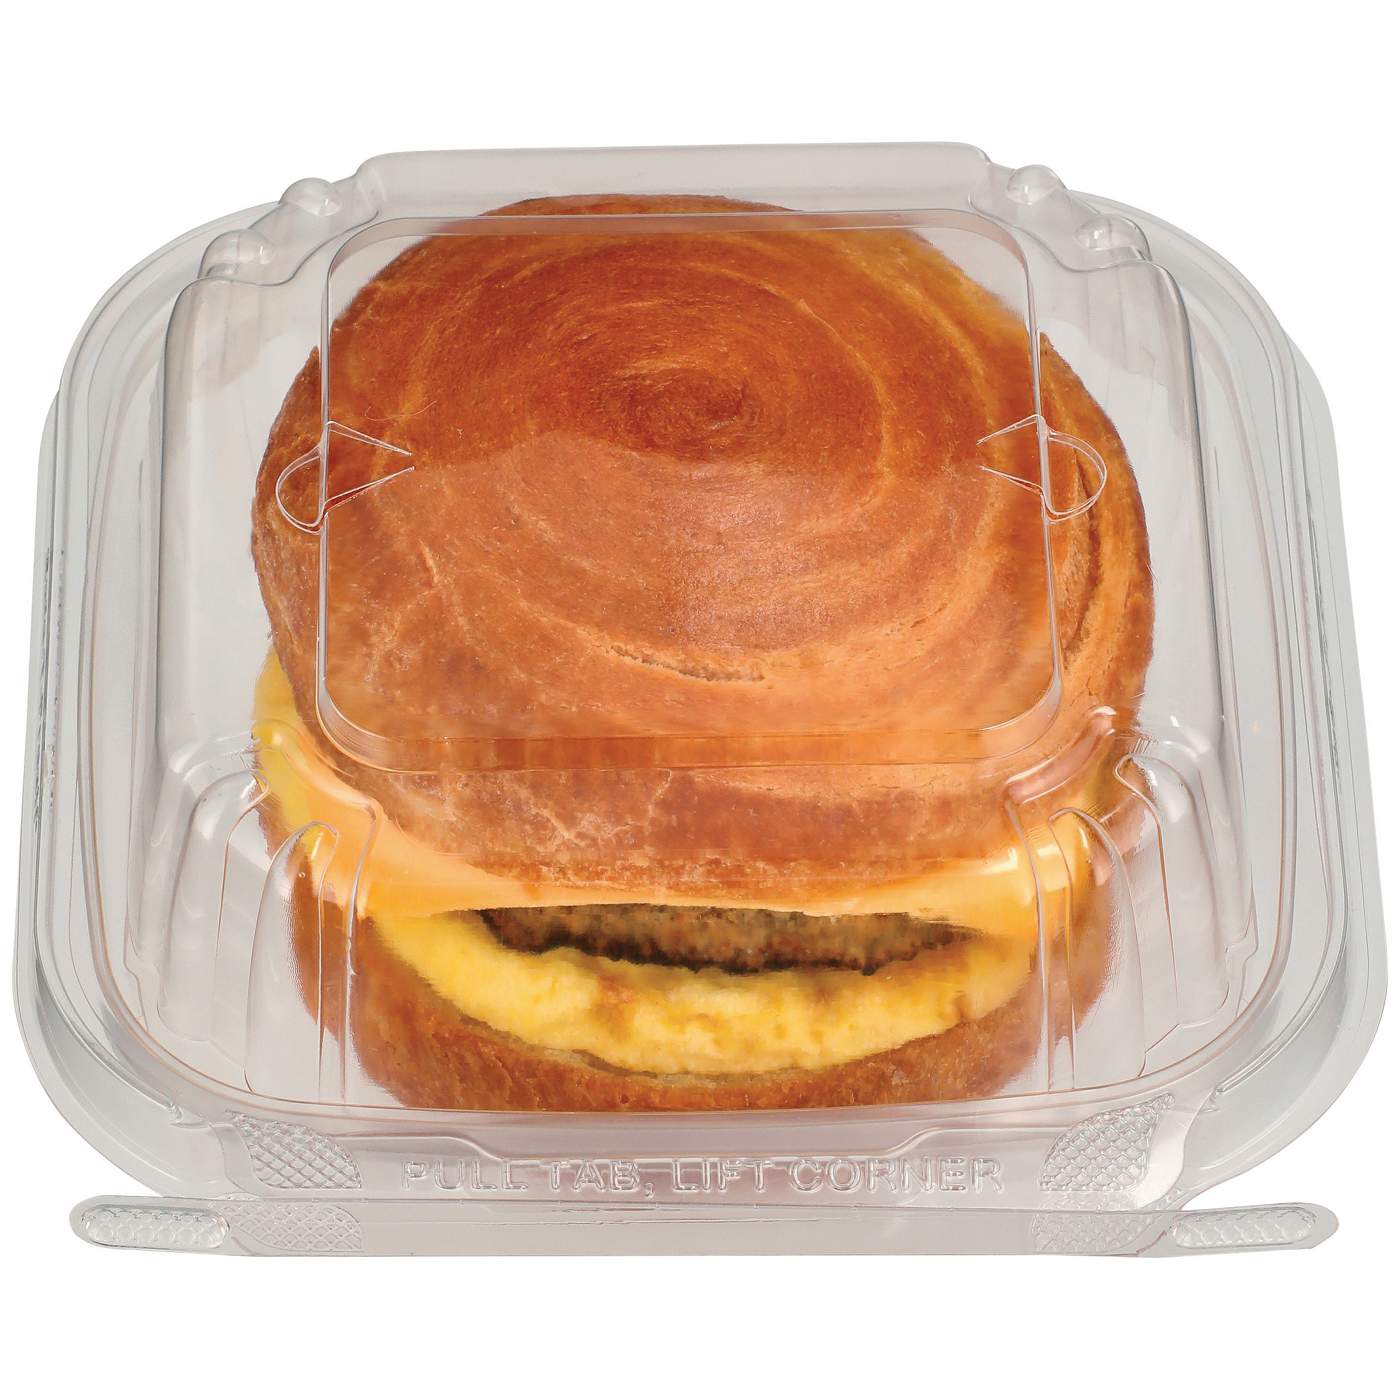 H-E-B Bakery Croissant Breakfast Sandwich - Sausage, Egg & Cheese; image 1 of 4